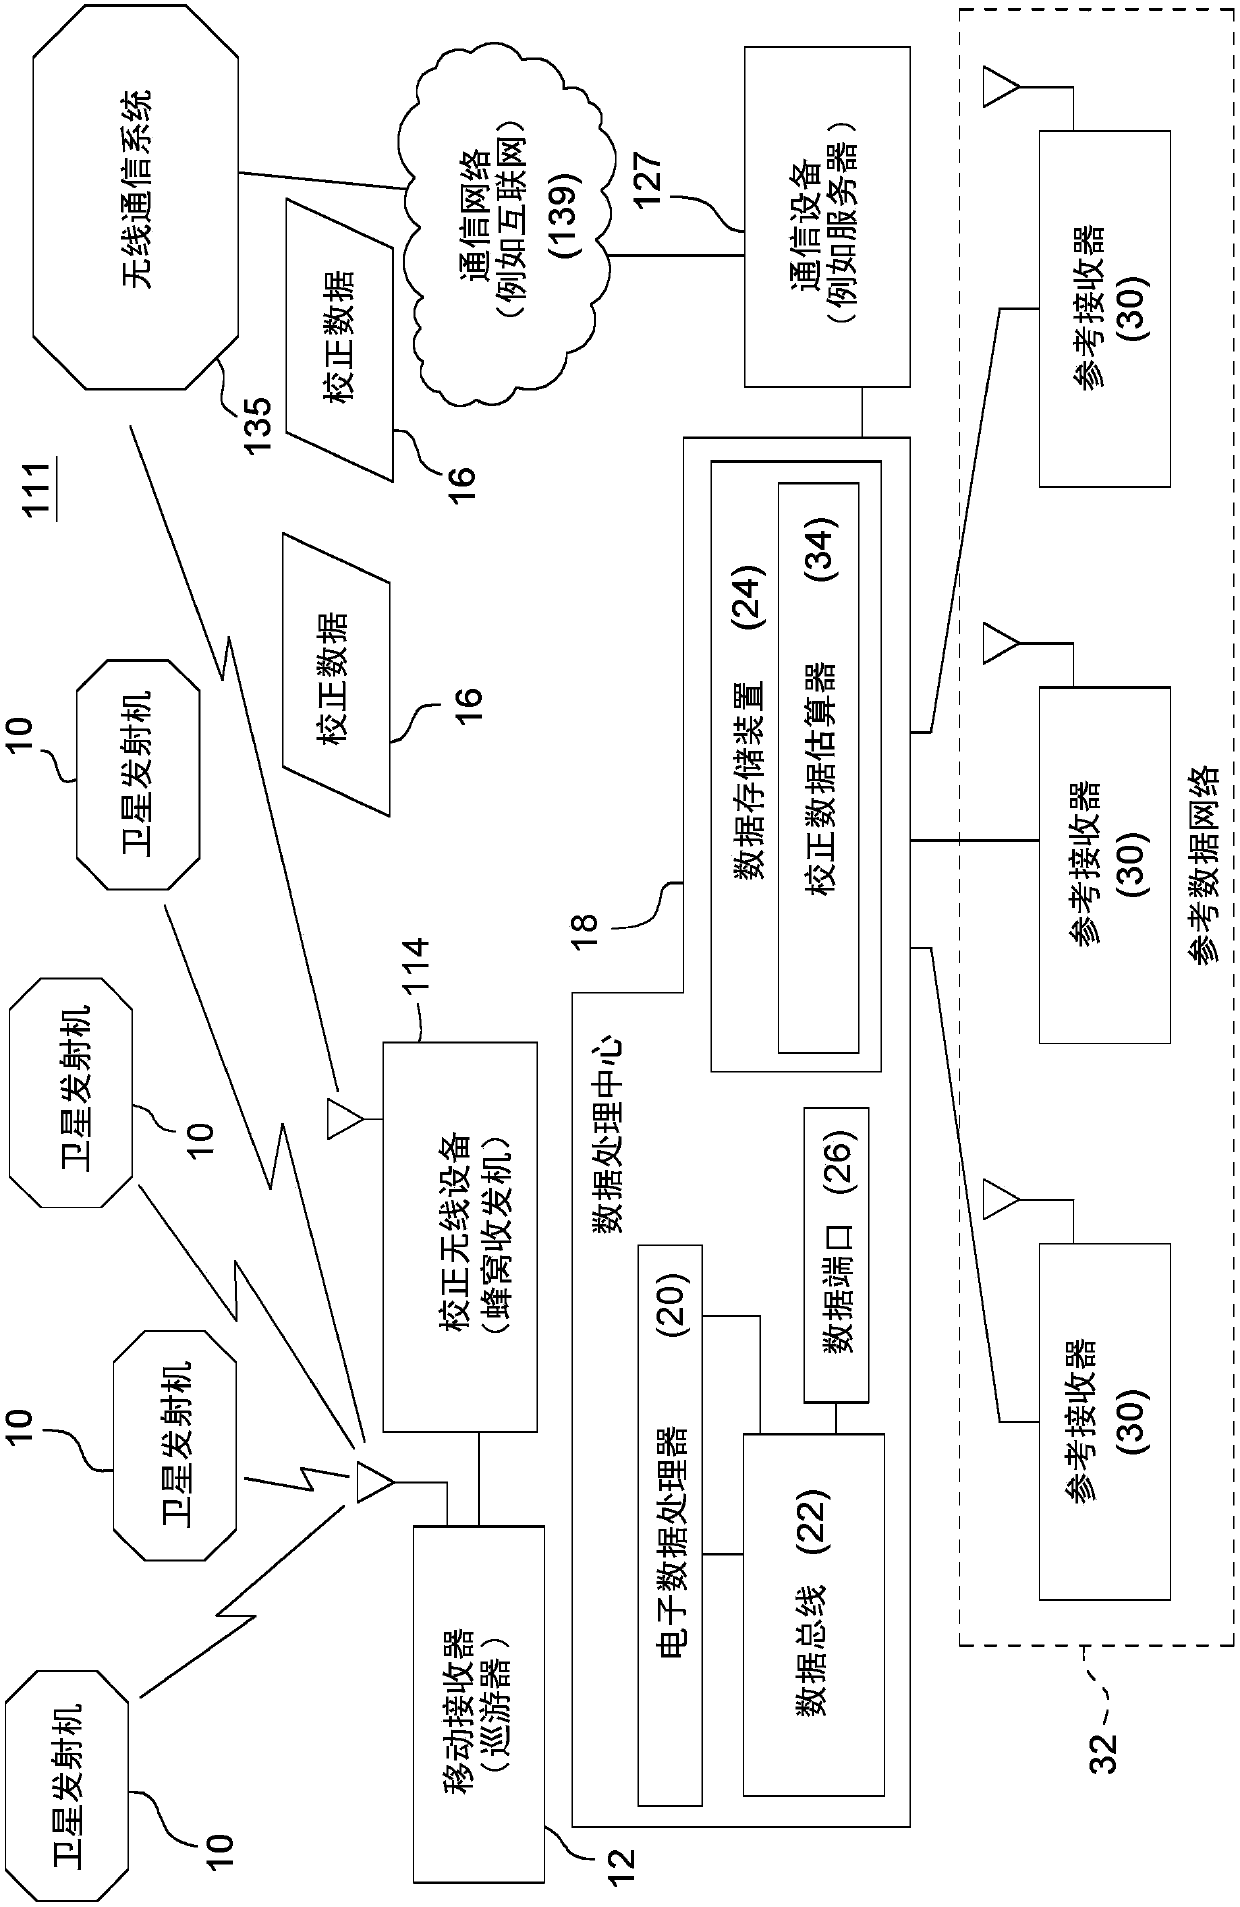 Satellite navigation receiver and method for switching between real-time kinematic mode and relative positioning mode